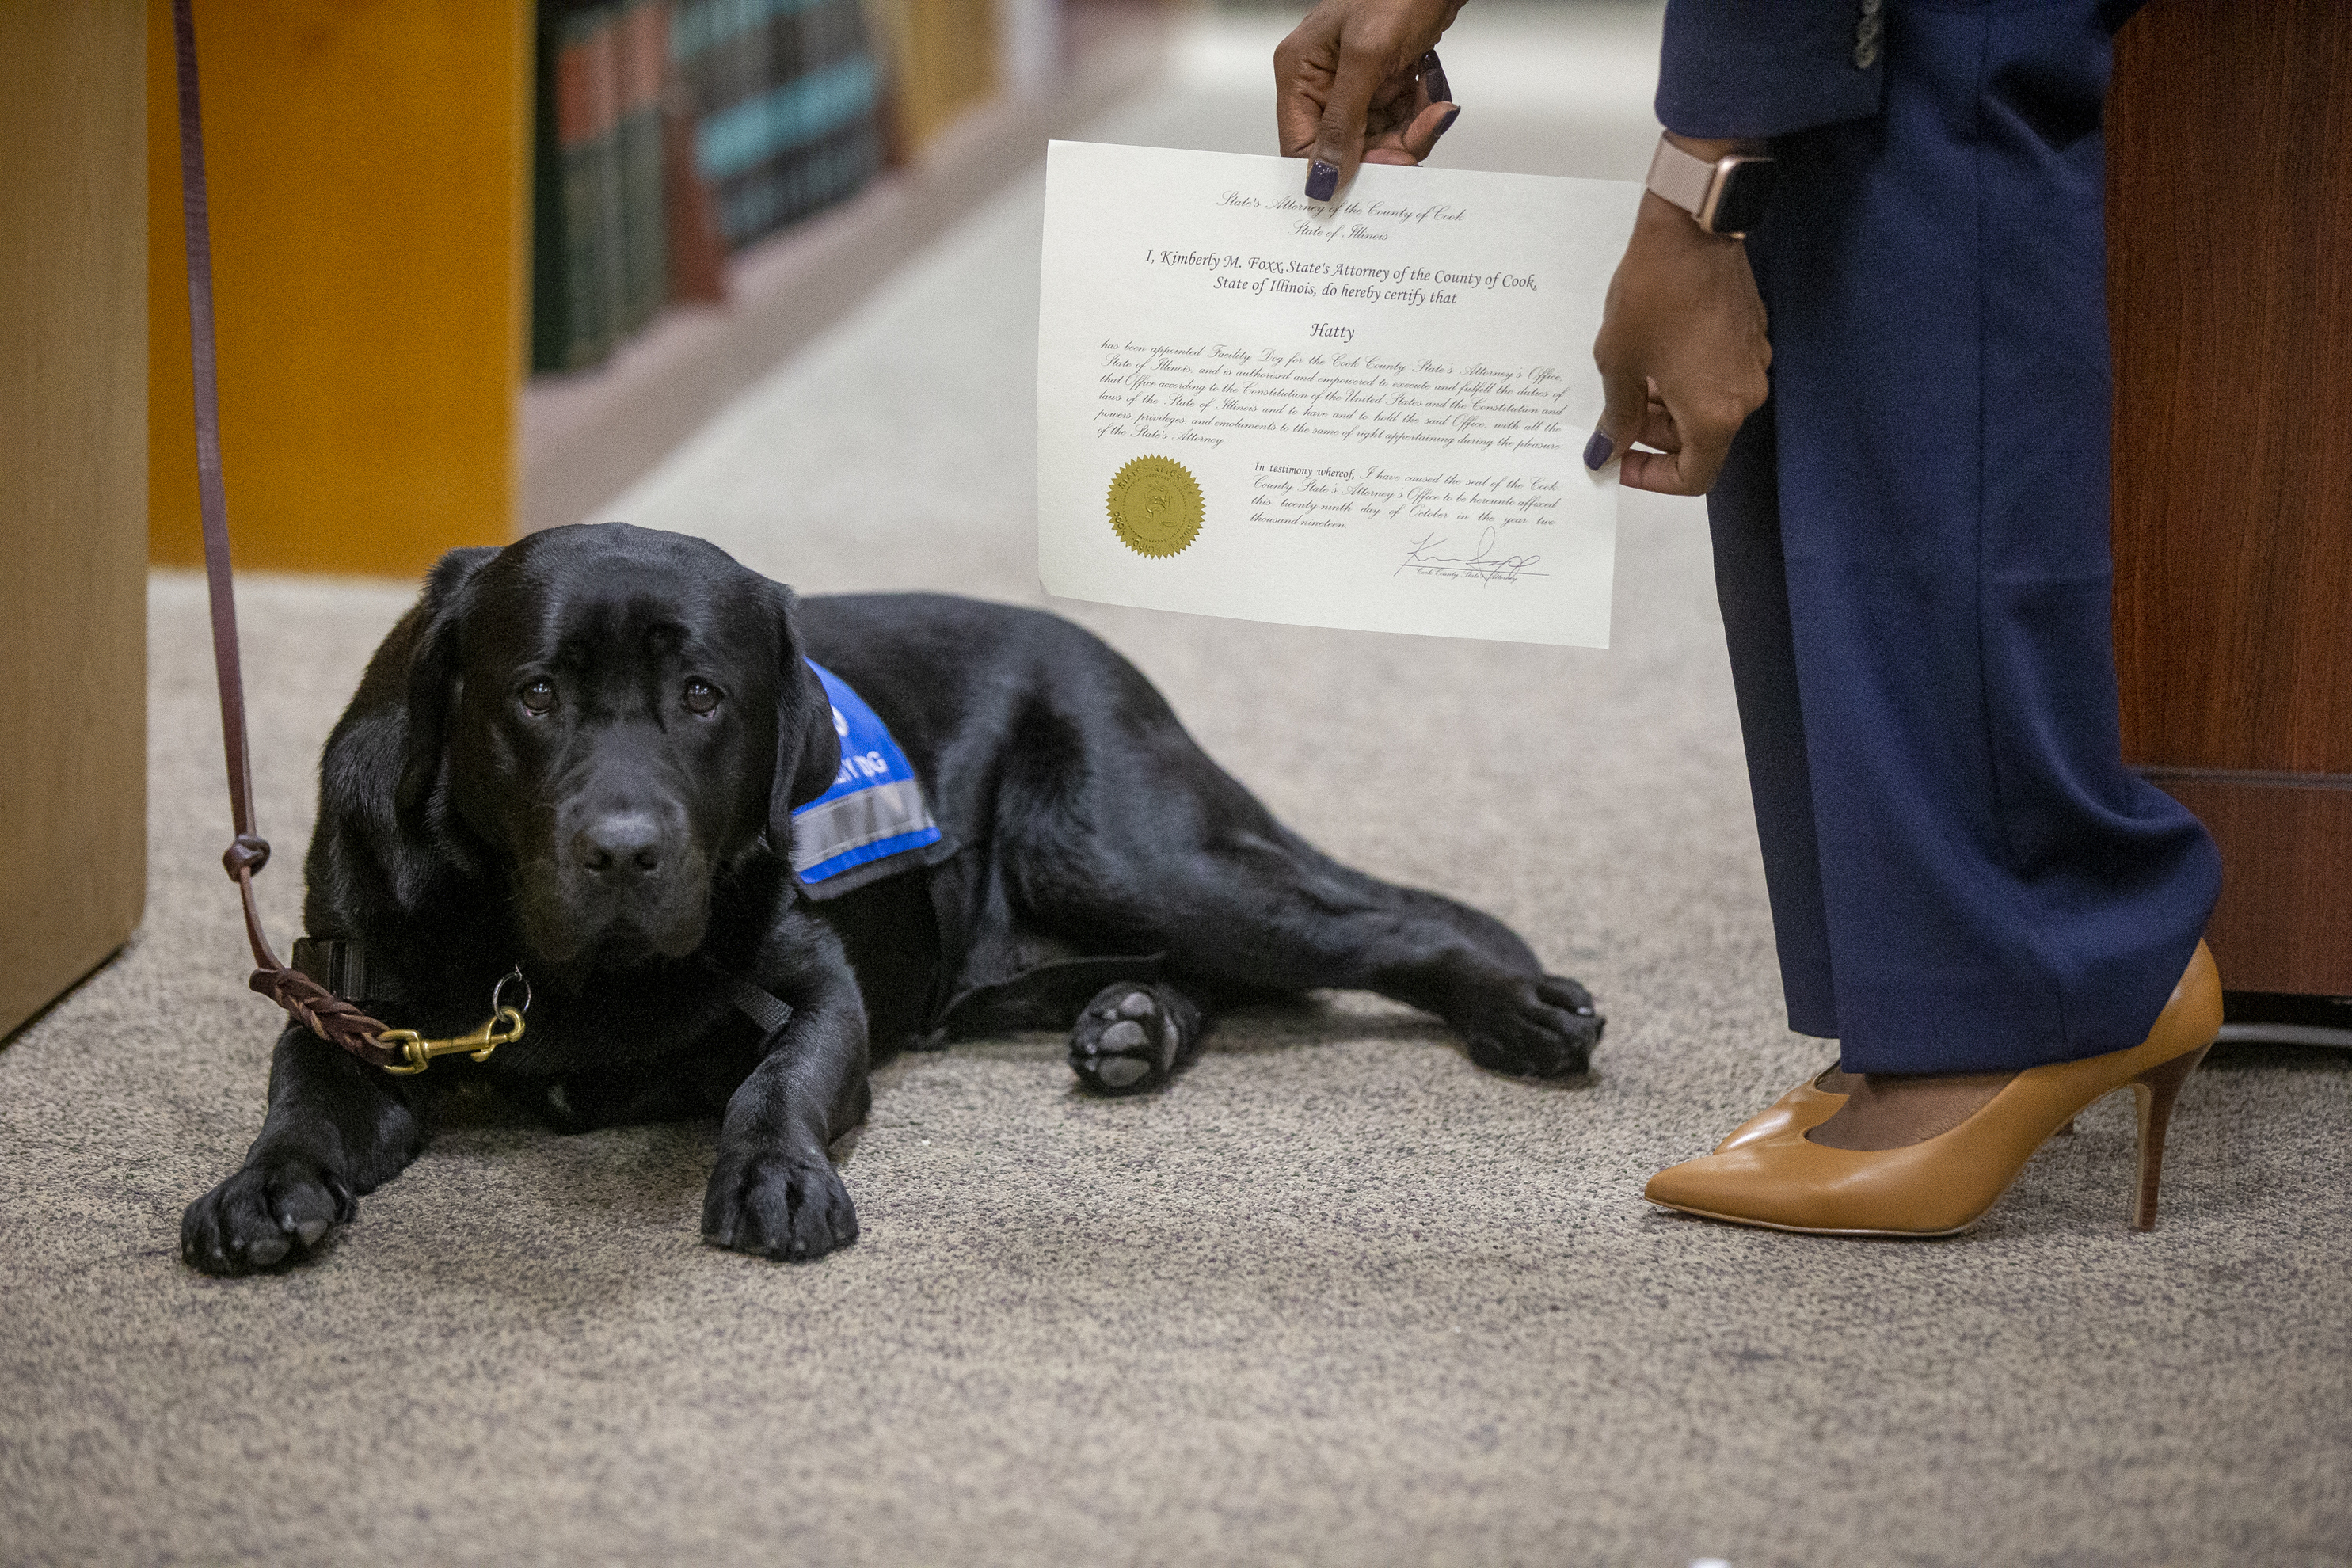 Cook County State's Attorney's first facility dog Hatty is sworn in by Cook County State's Attorney Kimberly Foxx at the George N Leighton Criminal Courthouse in Chicago